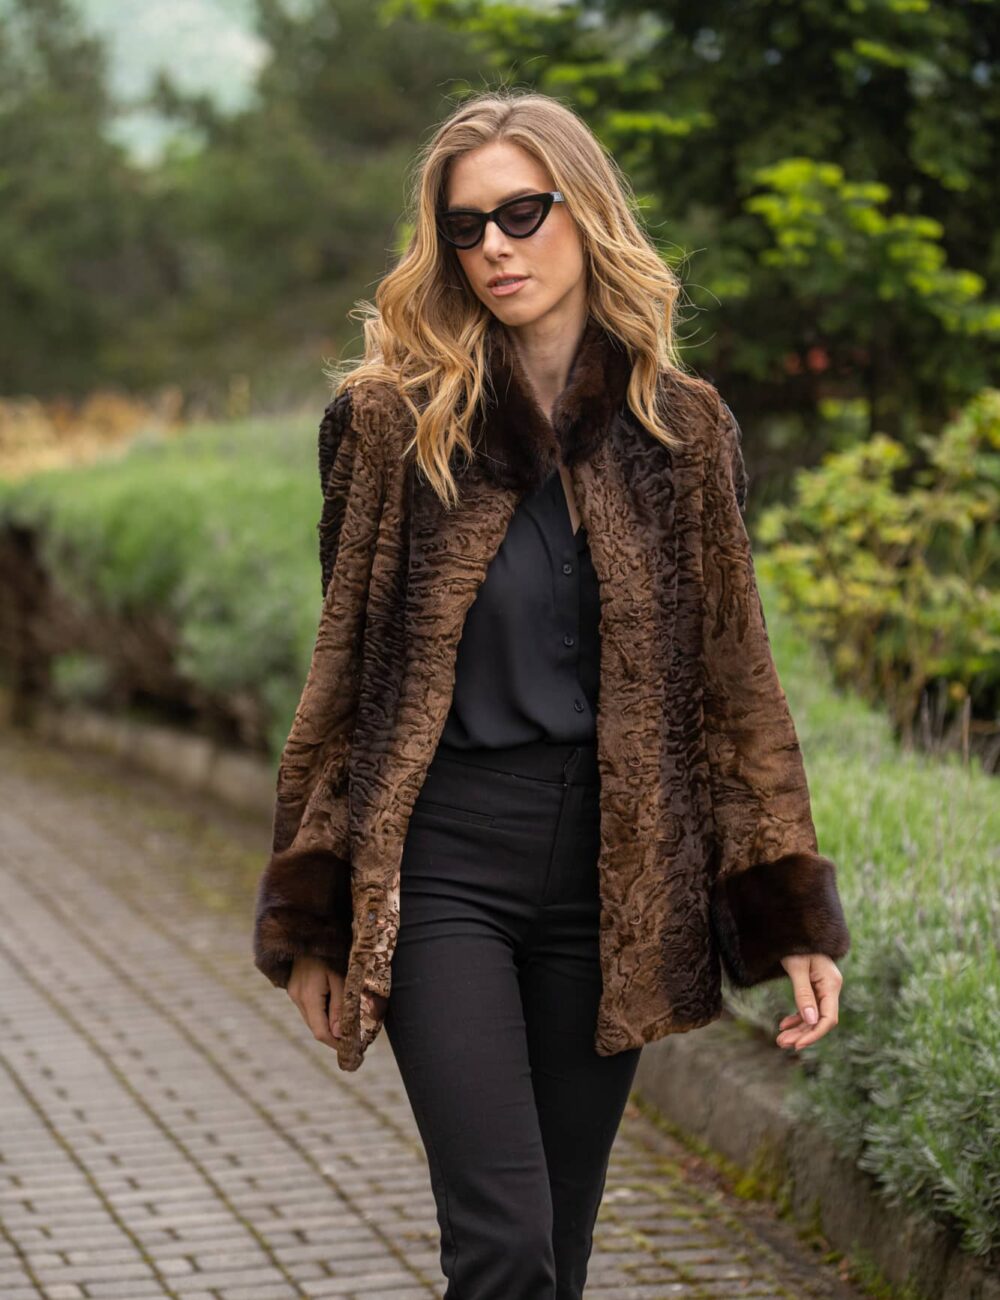 5 luxurious gifts for your loved one! - PAPEL FURS